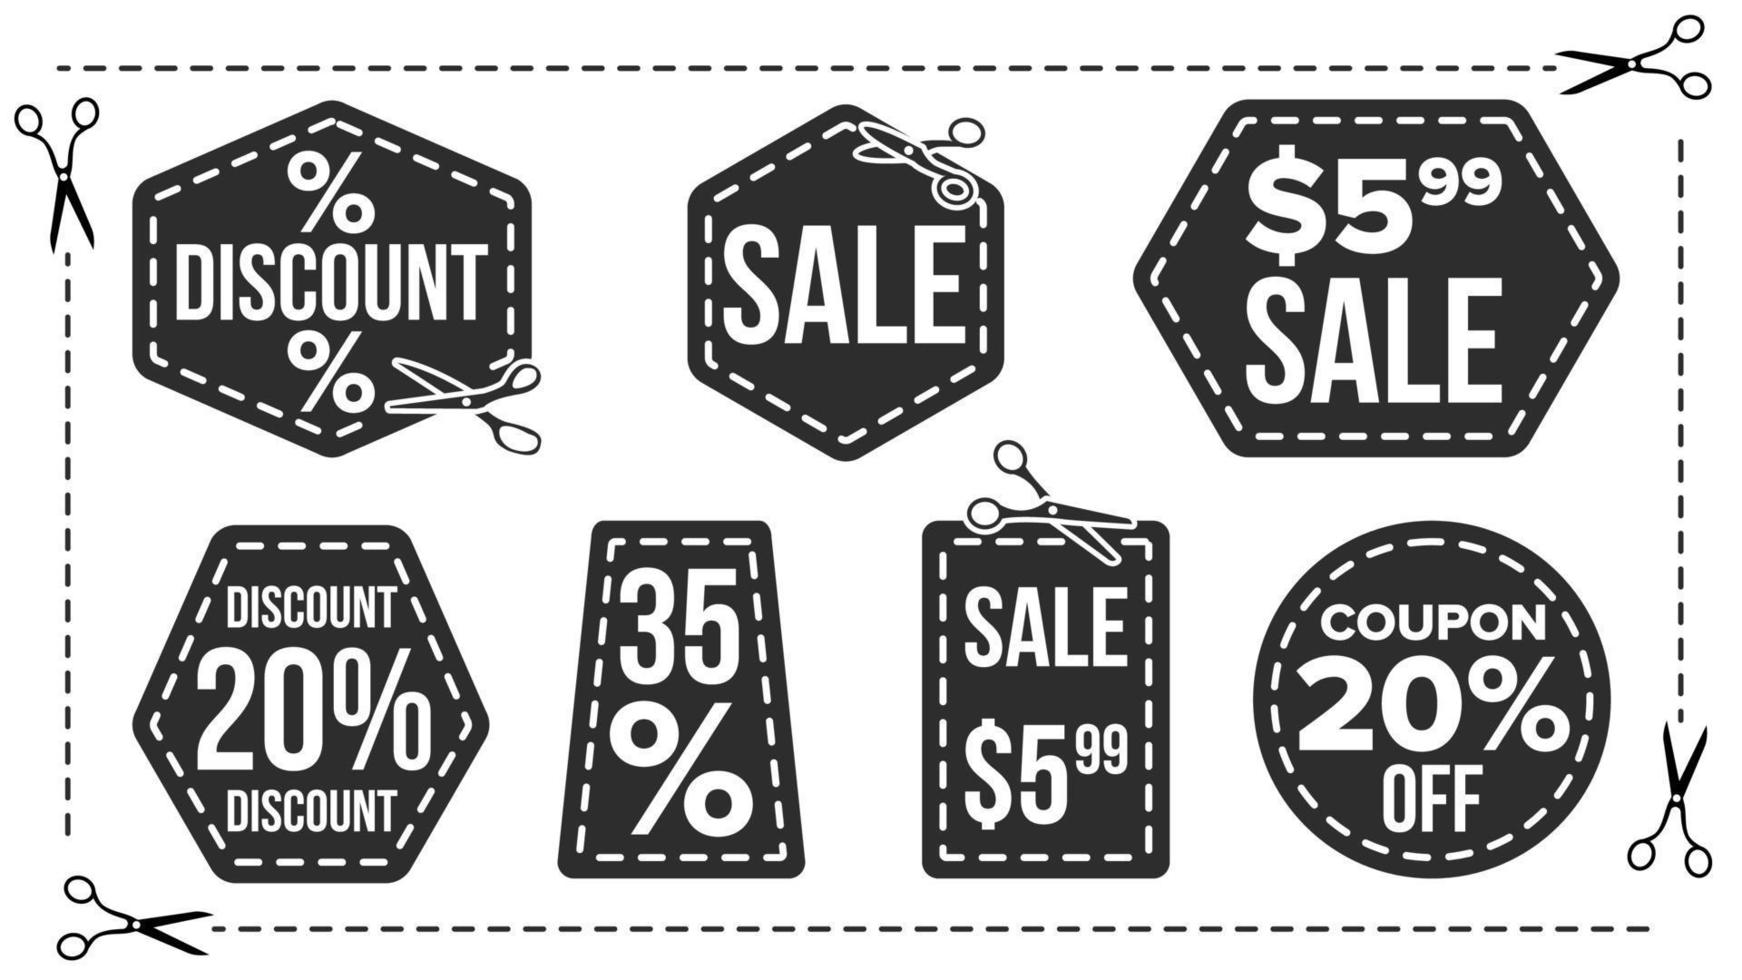 Sale Banners Set Vector. Edge Silhouettes. Discount Icons. Promotion. Half Price Stickers. Flat Isolated Illustration vector